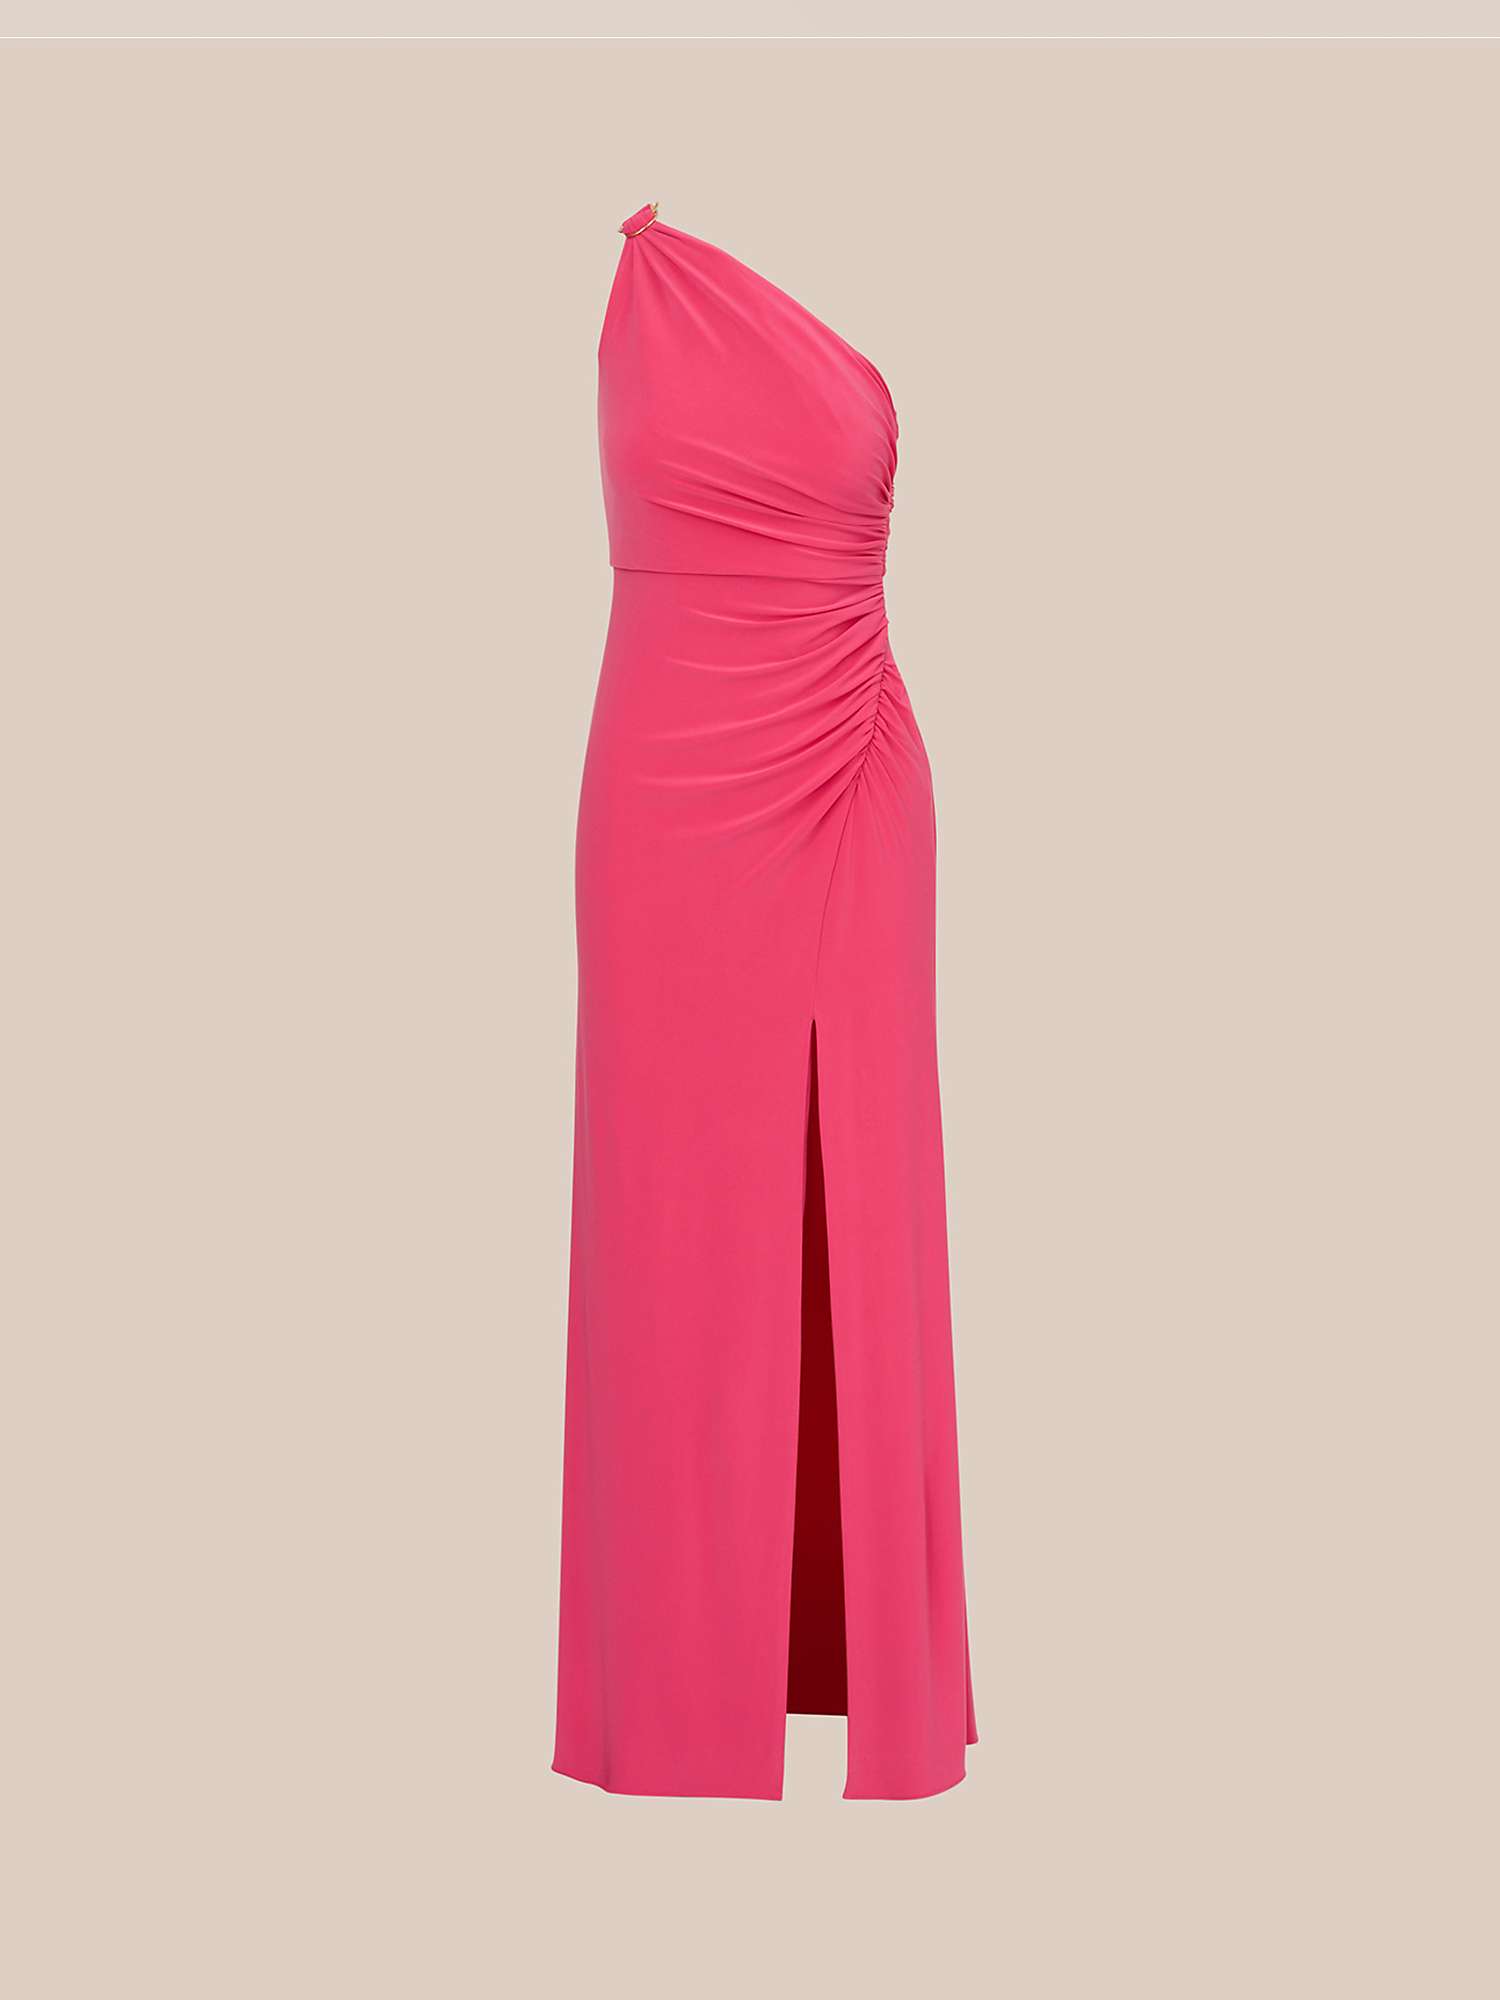 Buy Adrianna Papell One Shoulder Gown Dress, Pink Online at johnlewis.com